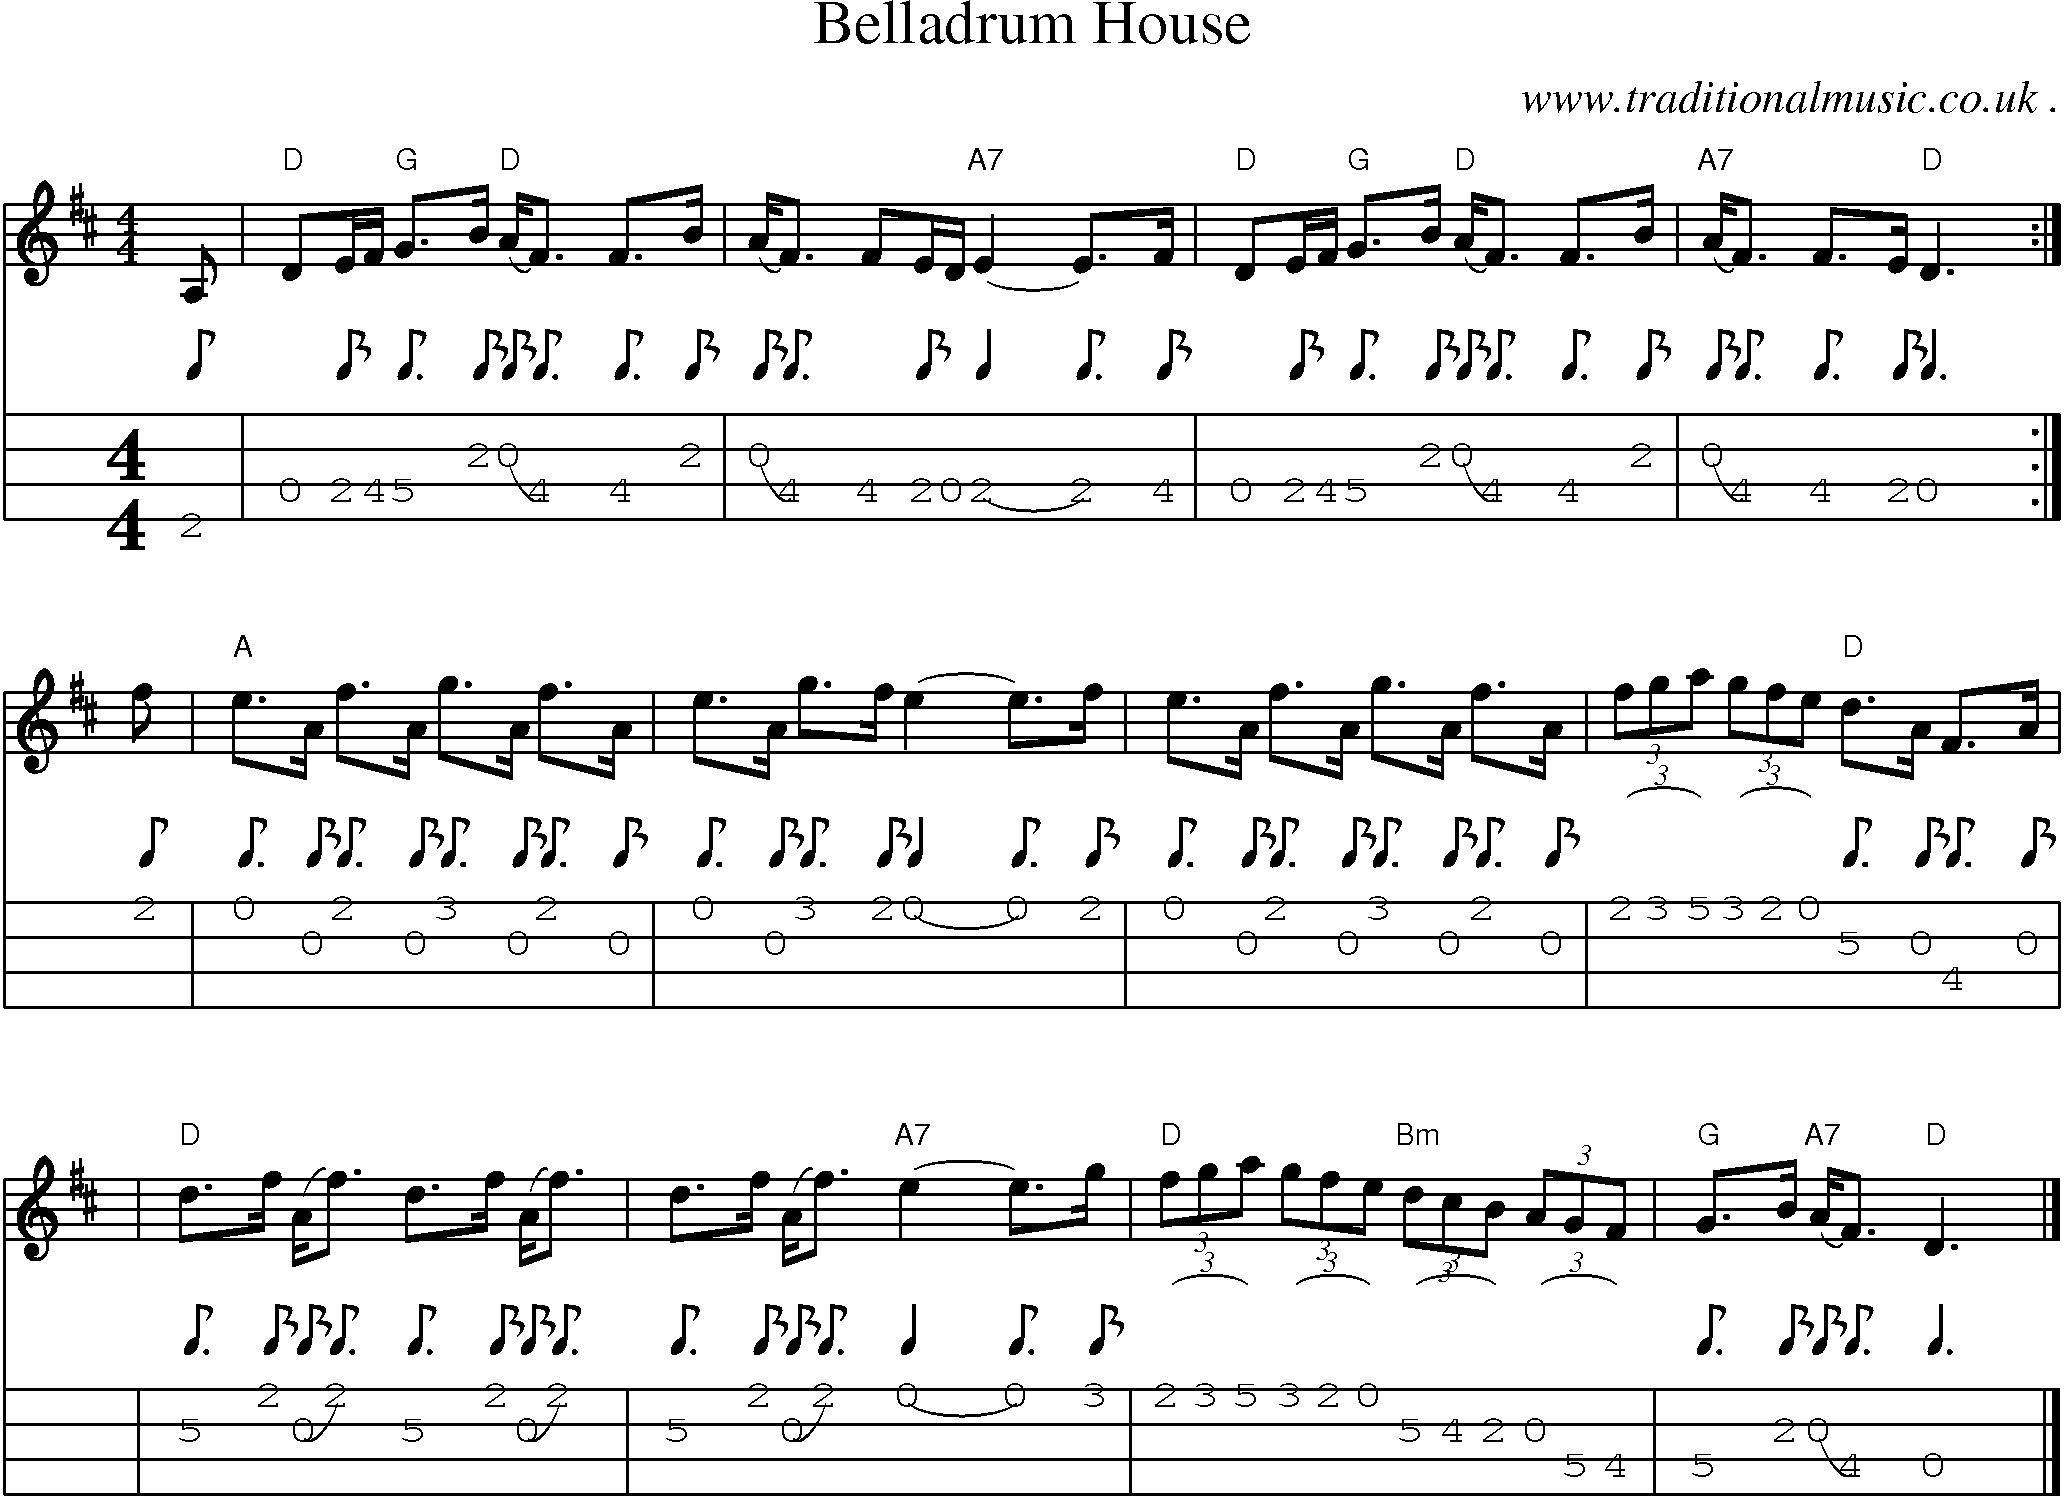 Sheet-music  score, Chords and Mandolin Tabs for Belladrum House